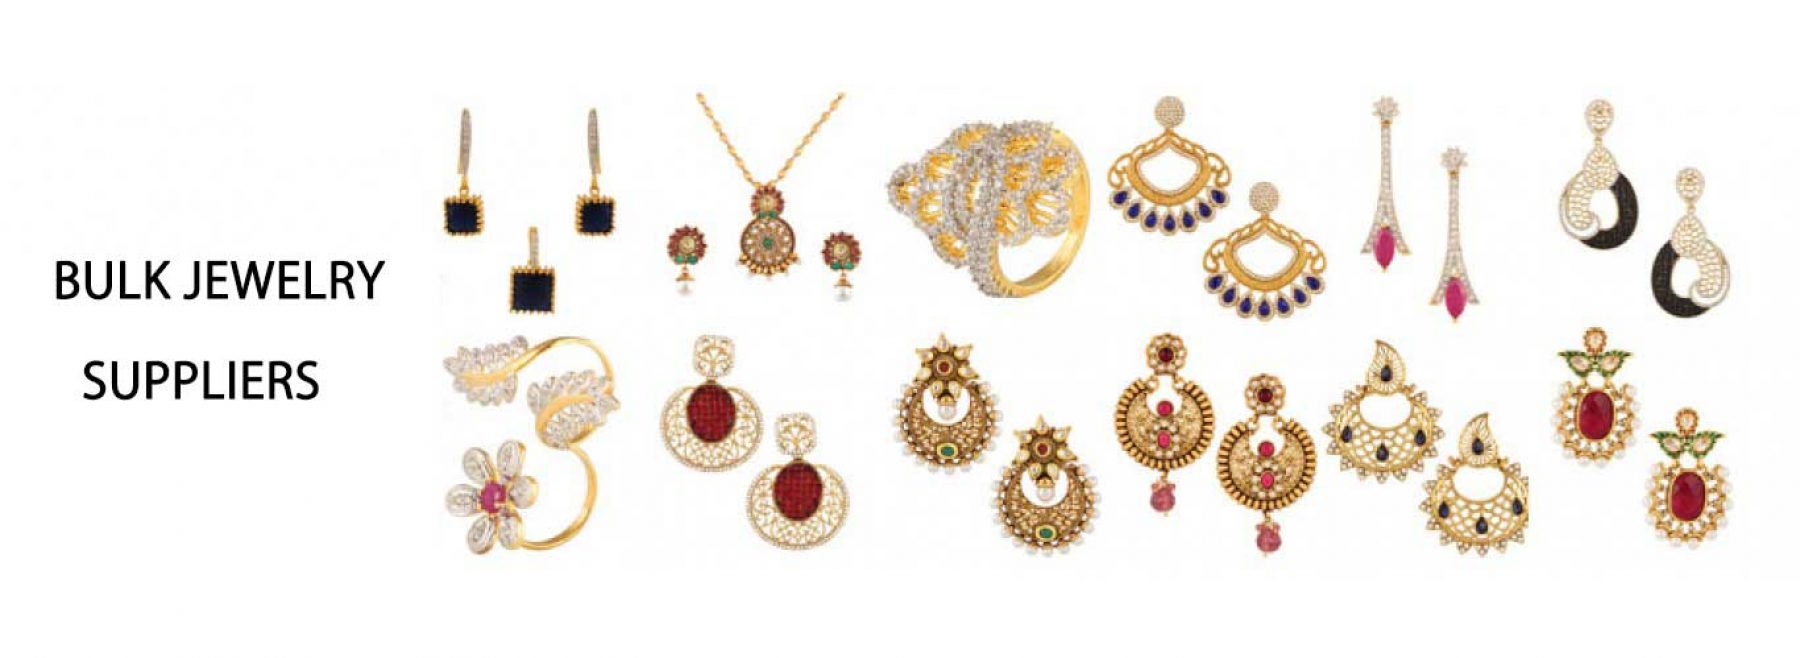 ONE OF THE BEST BULK JEWELRY SUPPLIERS